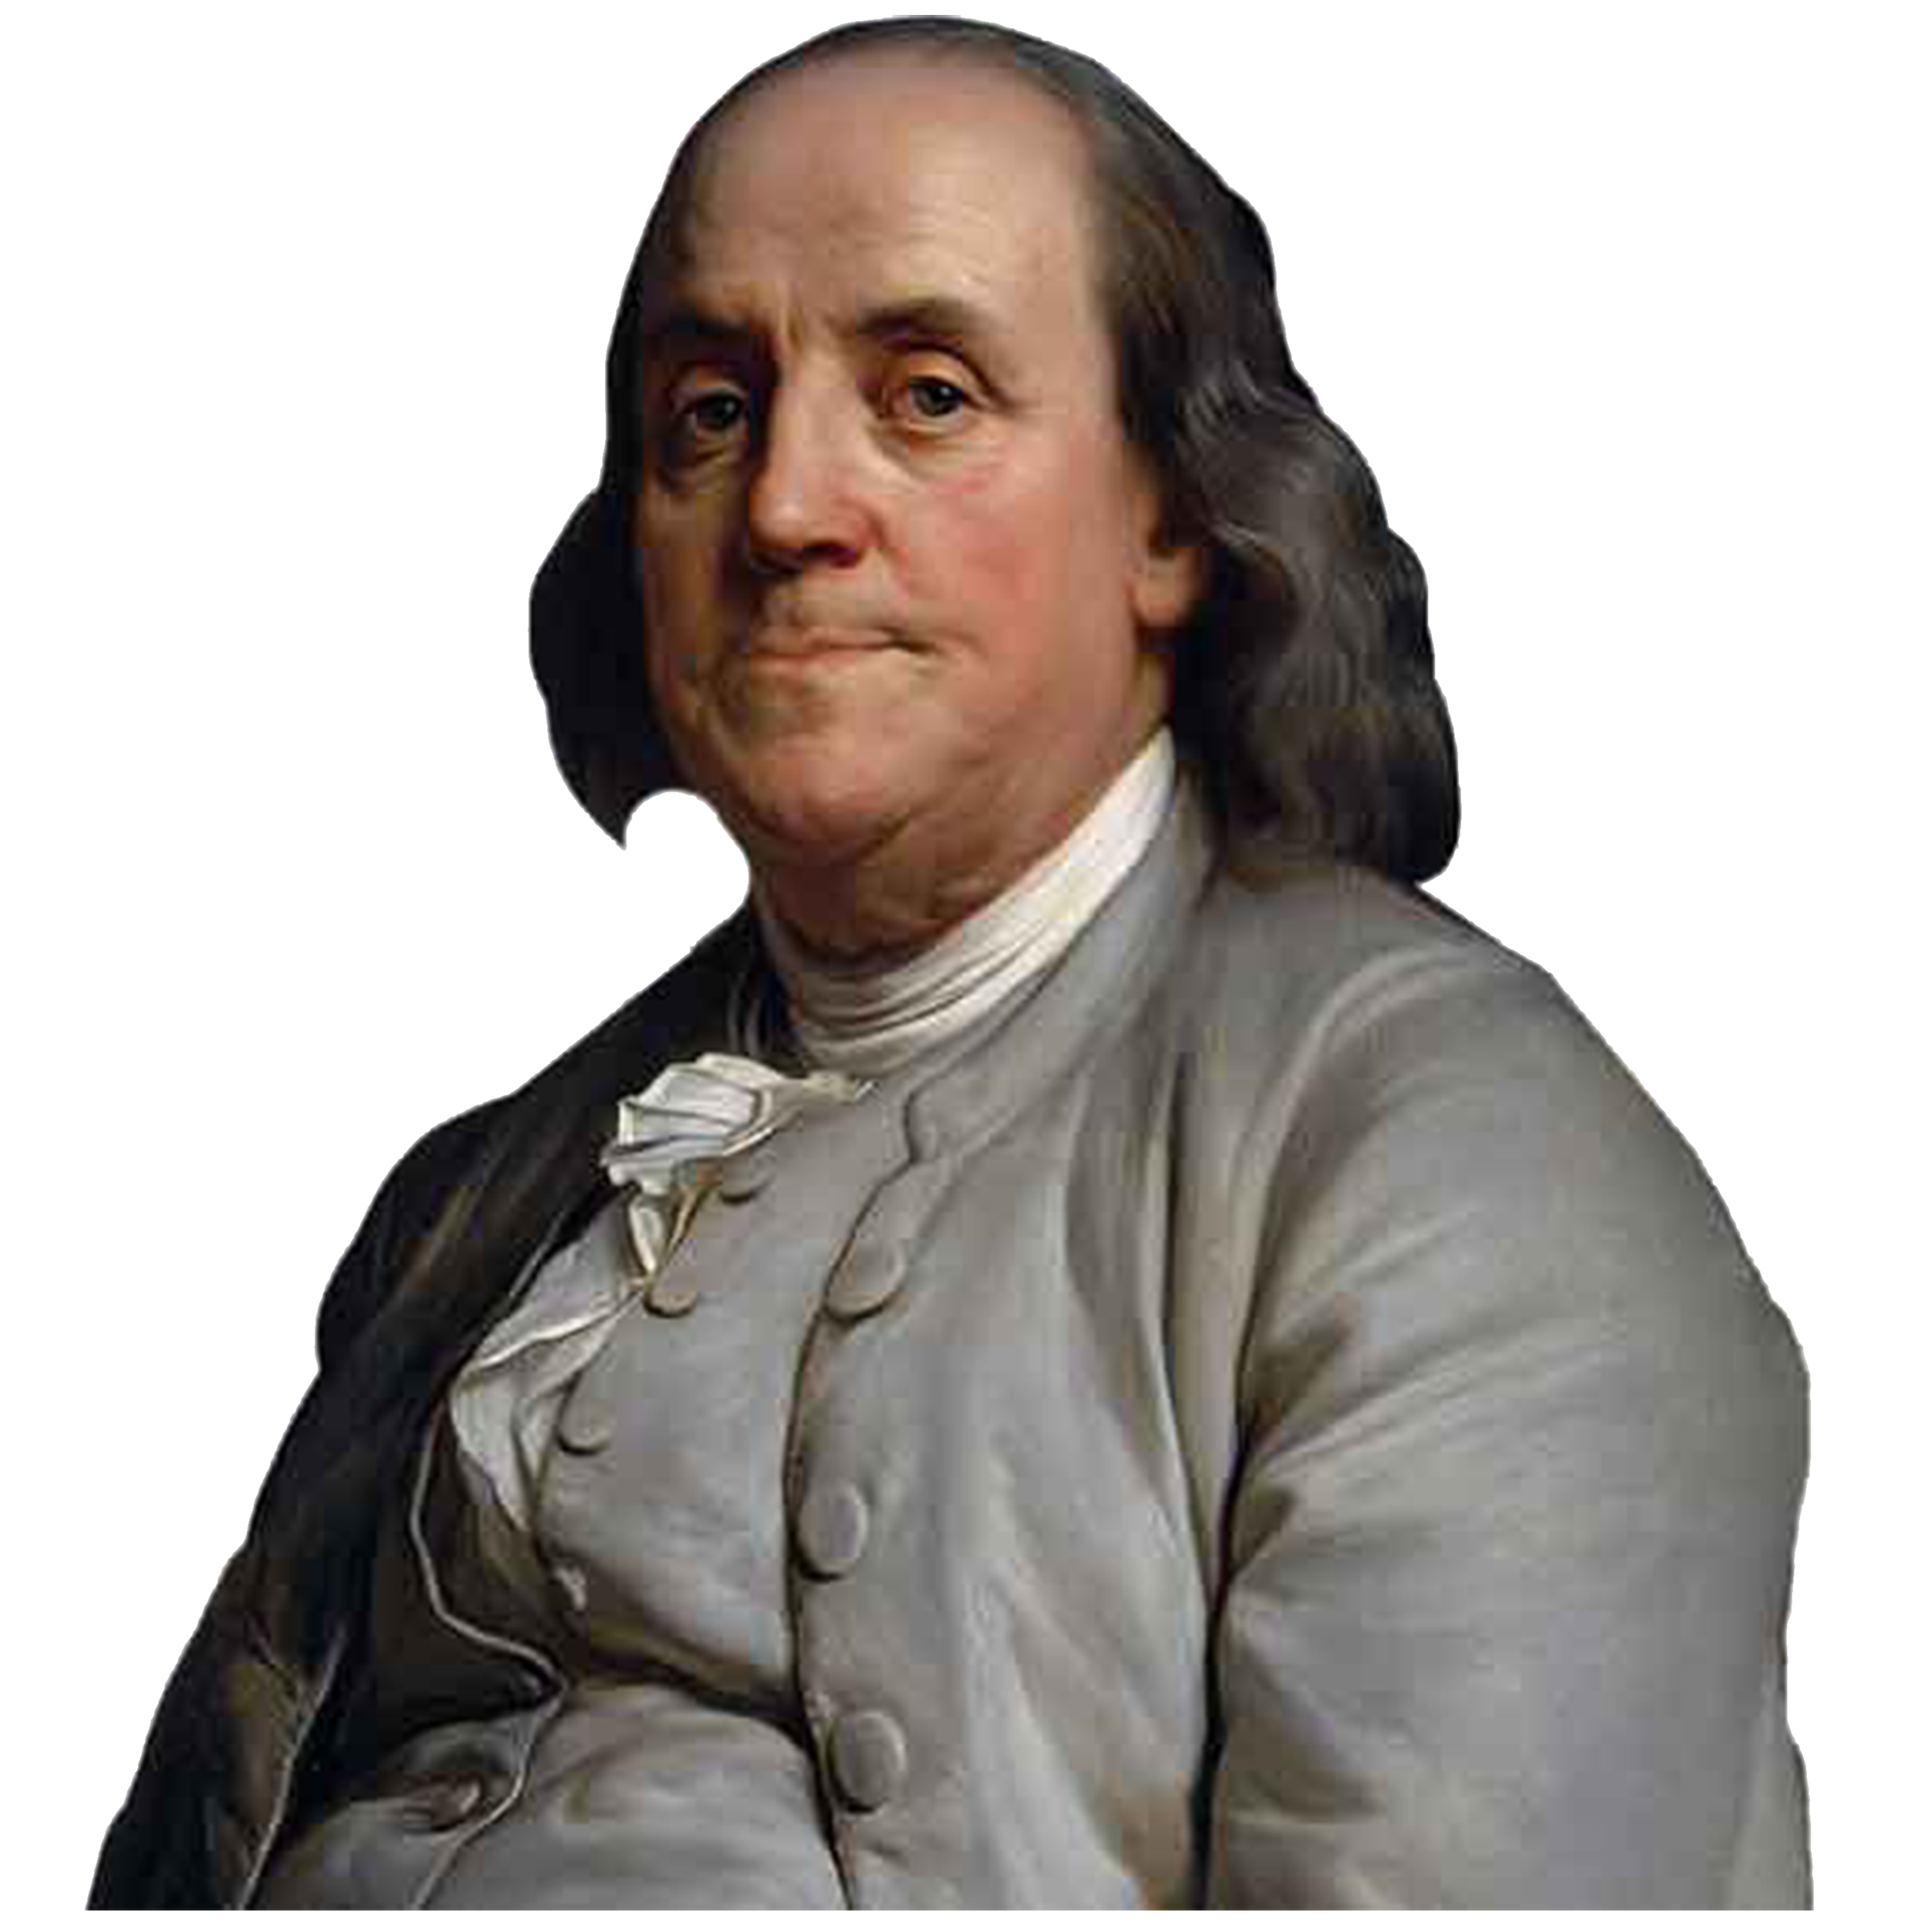 Benjamin Franklin, Business Motivations, Learning, LMS, Mobile App, Education Videos, Hire, Remote Employees, Ecommerce, Team, Virtual Employees, United States, Canada, E-Commerce, Education Video, Education App, Website, Digital Marketing, social media, Graphic Design, Advertising, Entrepreneurs, Business Owners, Subscribe, Credit Card